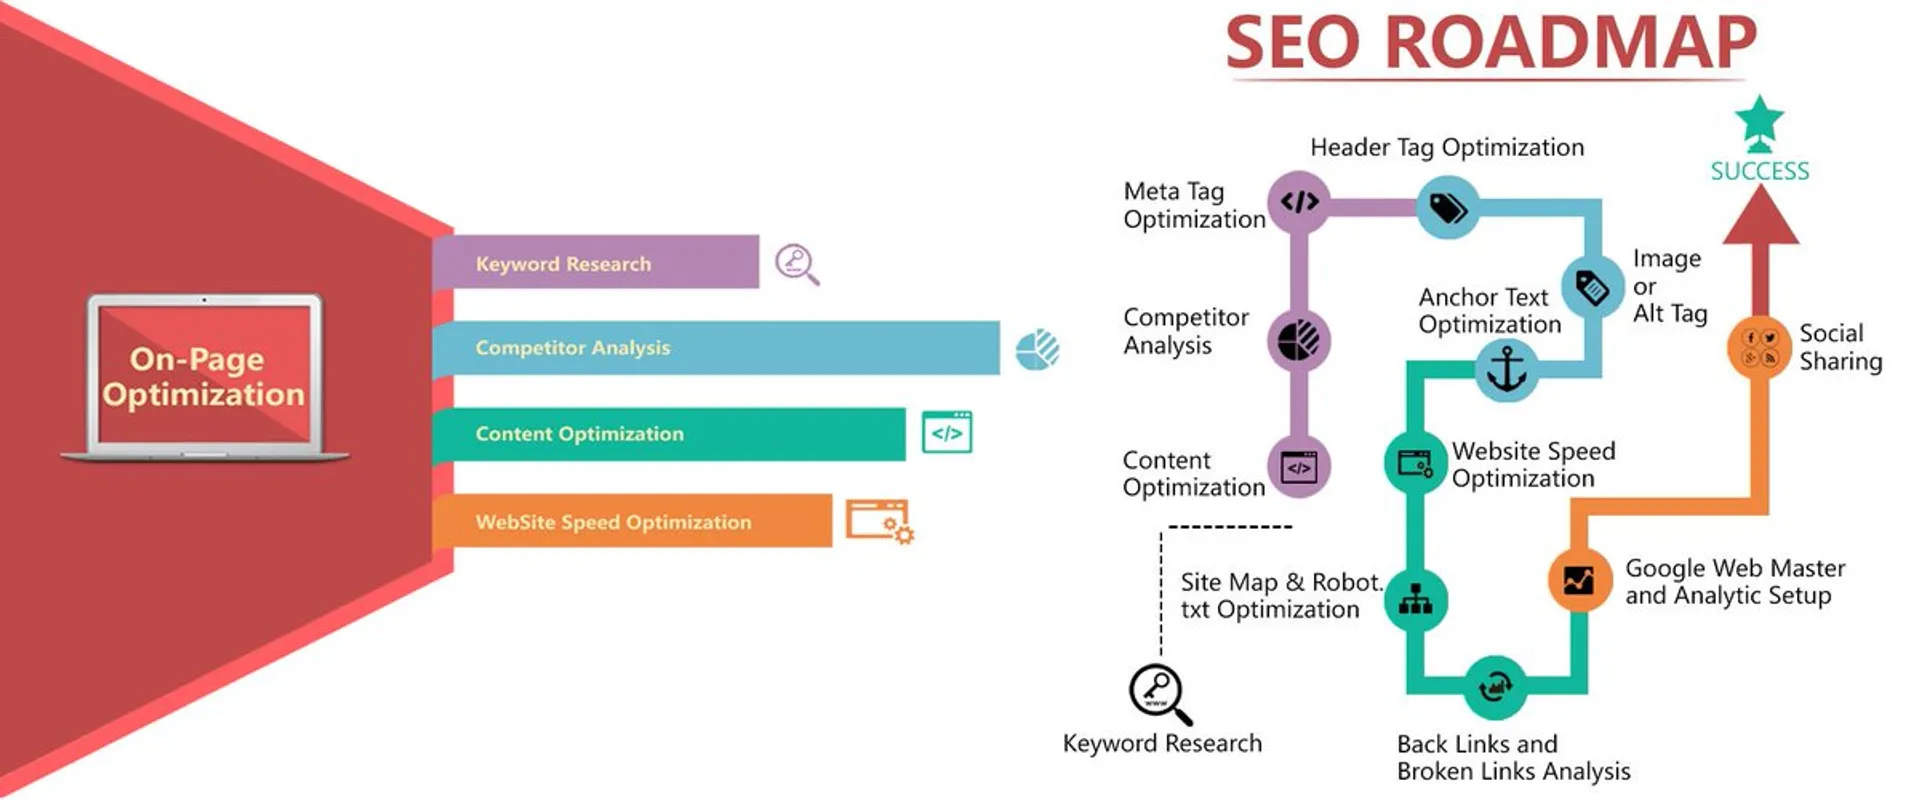 On-Page Optimization is a challenging task after website development. People are in search on on page optimizers that have the right skills to take your website according to the SERPs. If you are looking for SEO Expert for all SEO related task then: https://www.fiverr.com/s/z2Qpwo